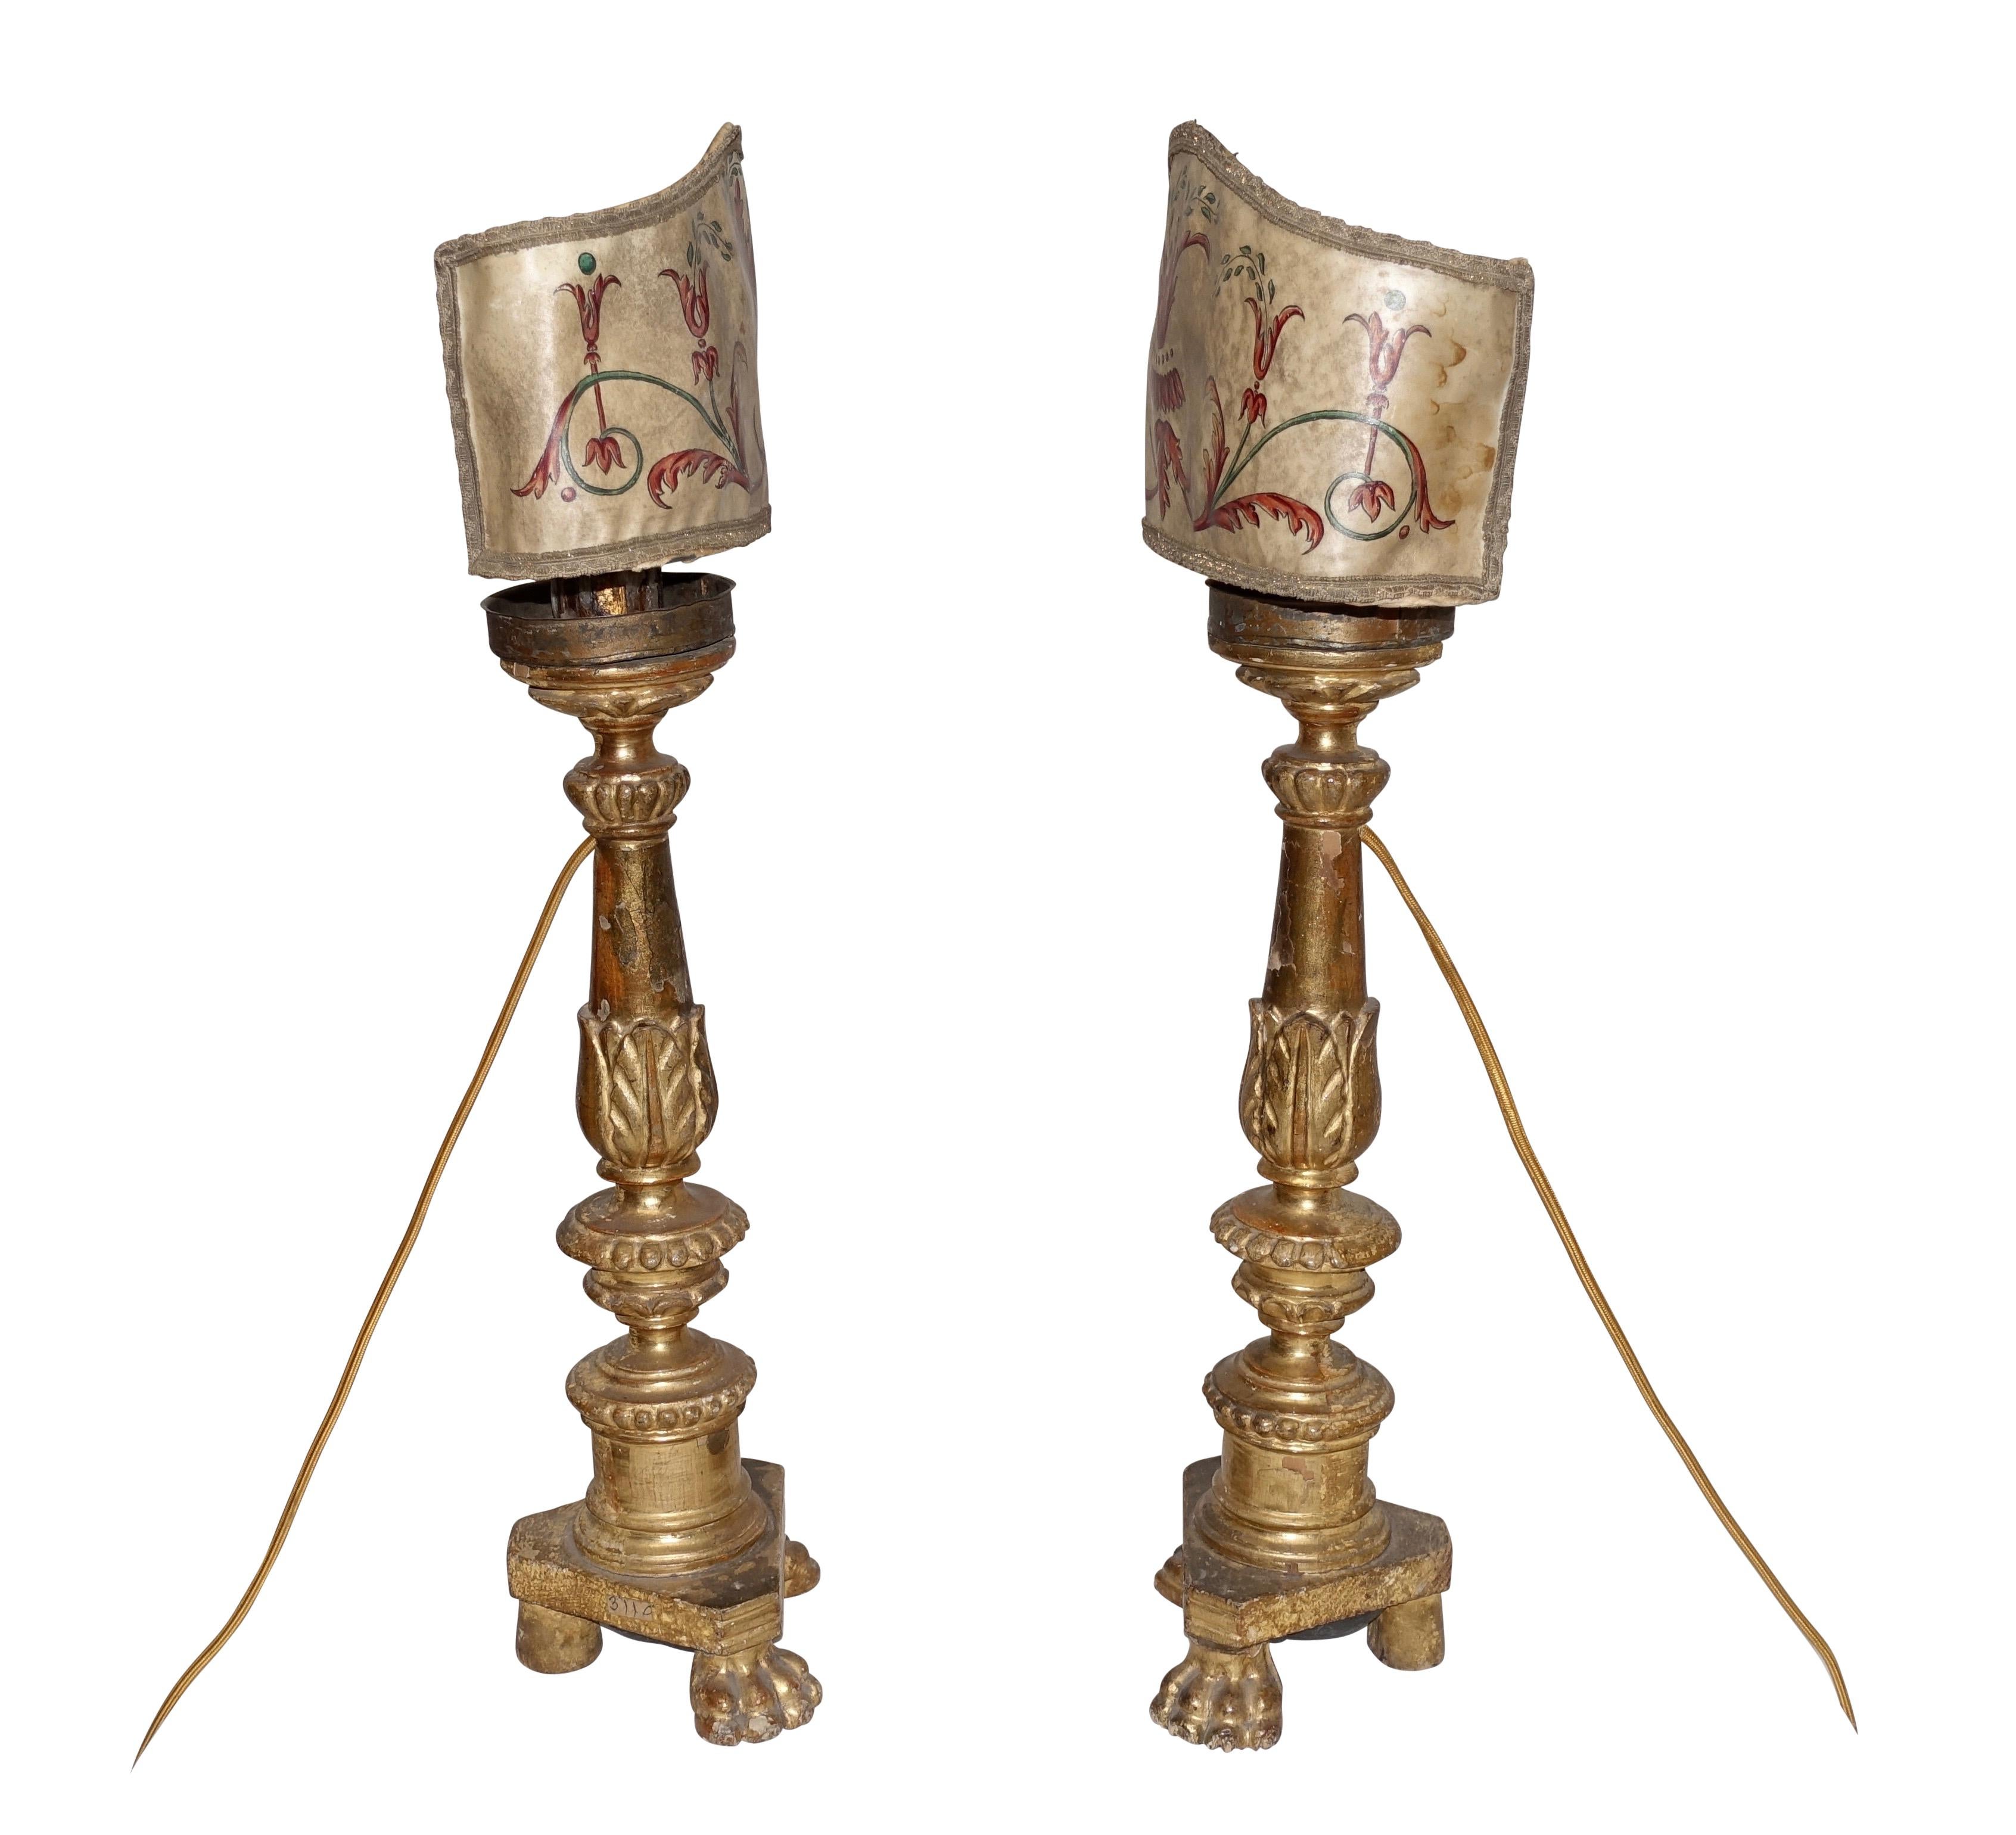 Pair of Gilt Candlestick Lamps with Parchment Shades, Italian, 18th Century 3